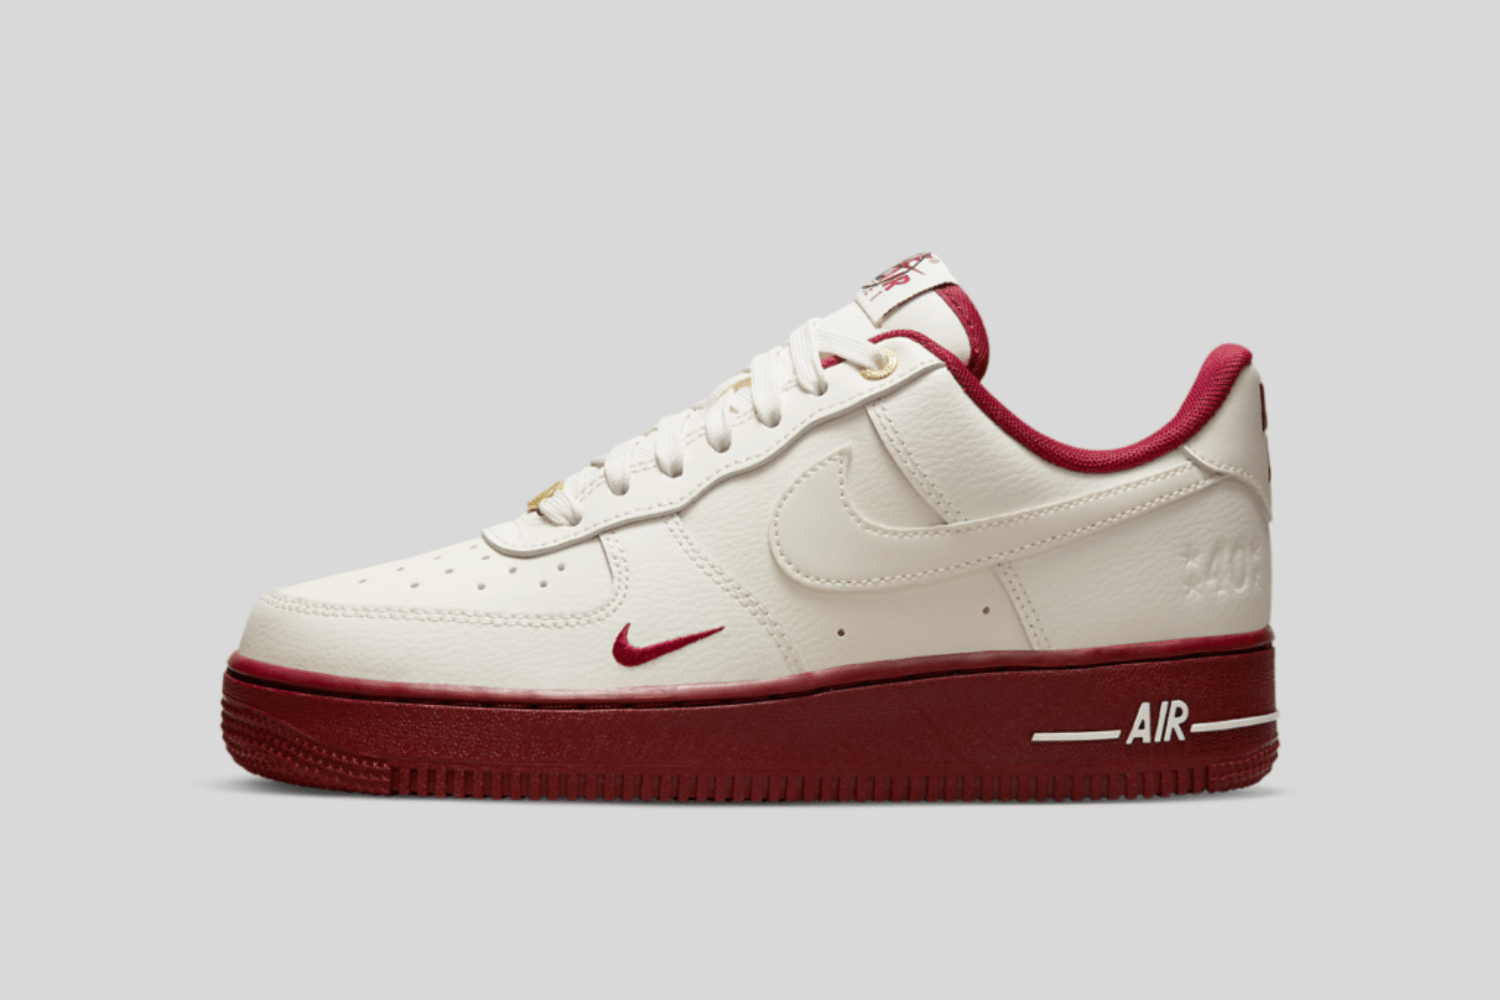 Nike drops Air Force 1 WMNS for 40th birthday